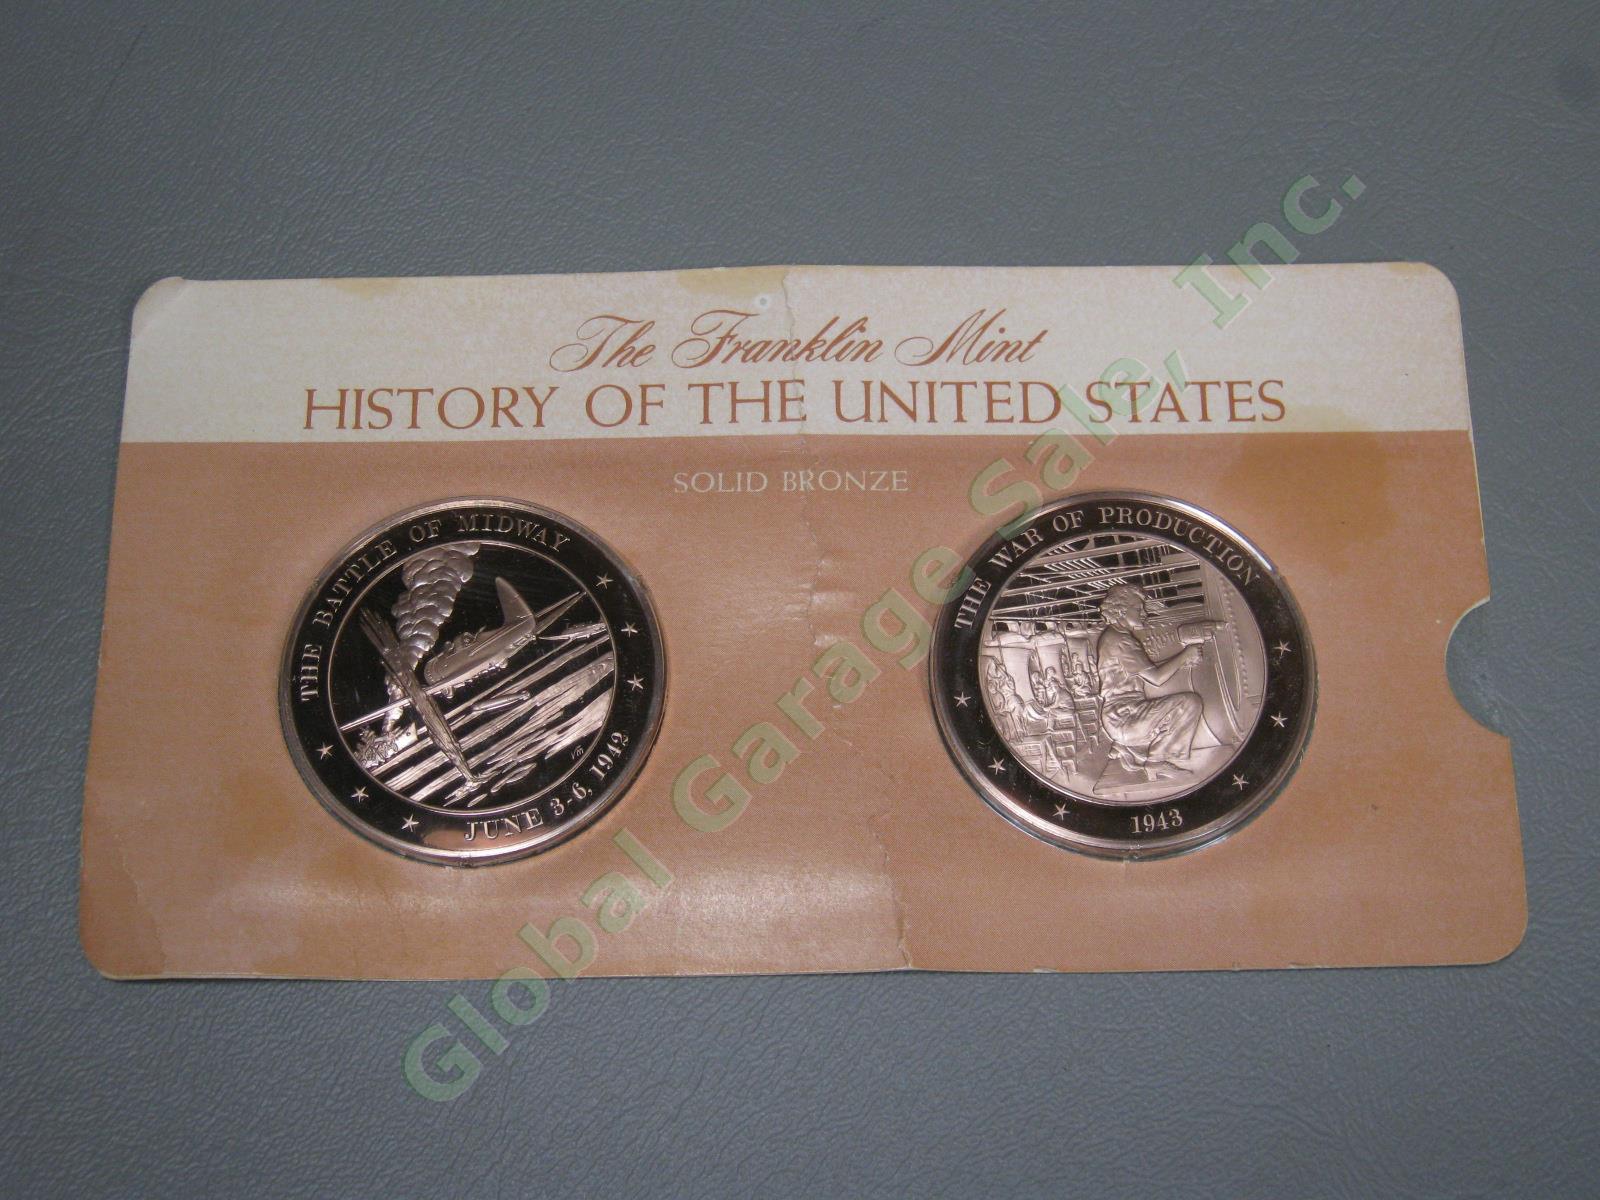 202 Franklin Mint 1776-1975 History Of The United State Solid Bronze Medal Coins 9